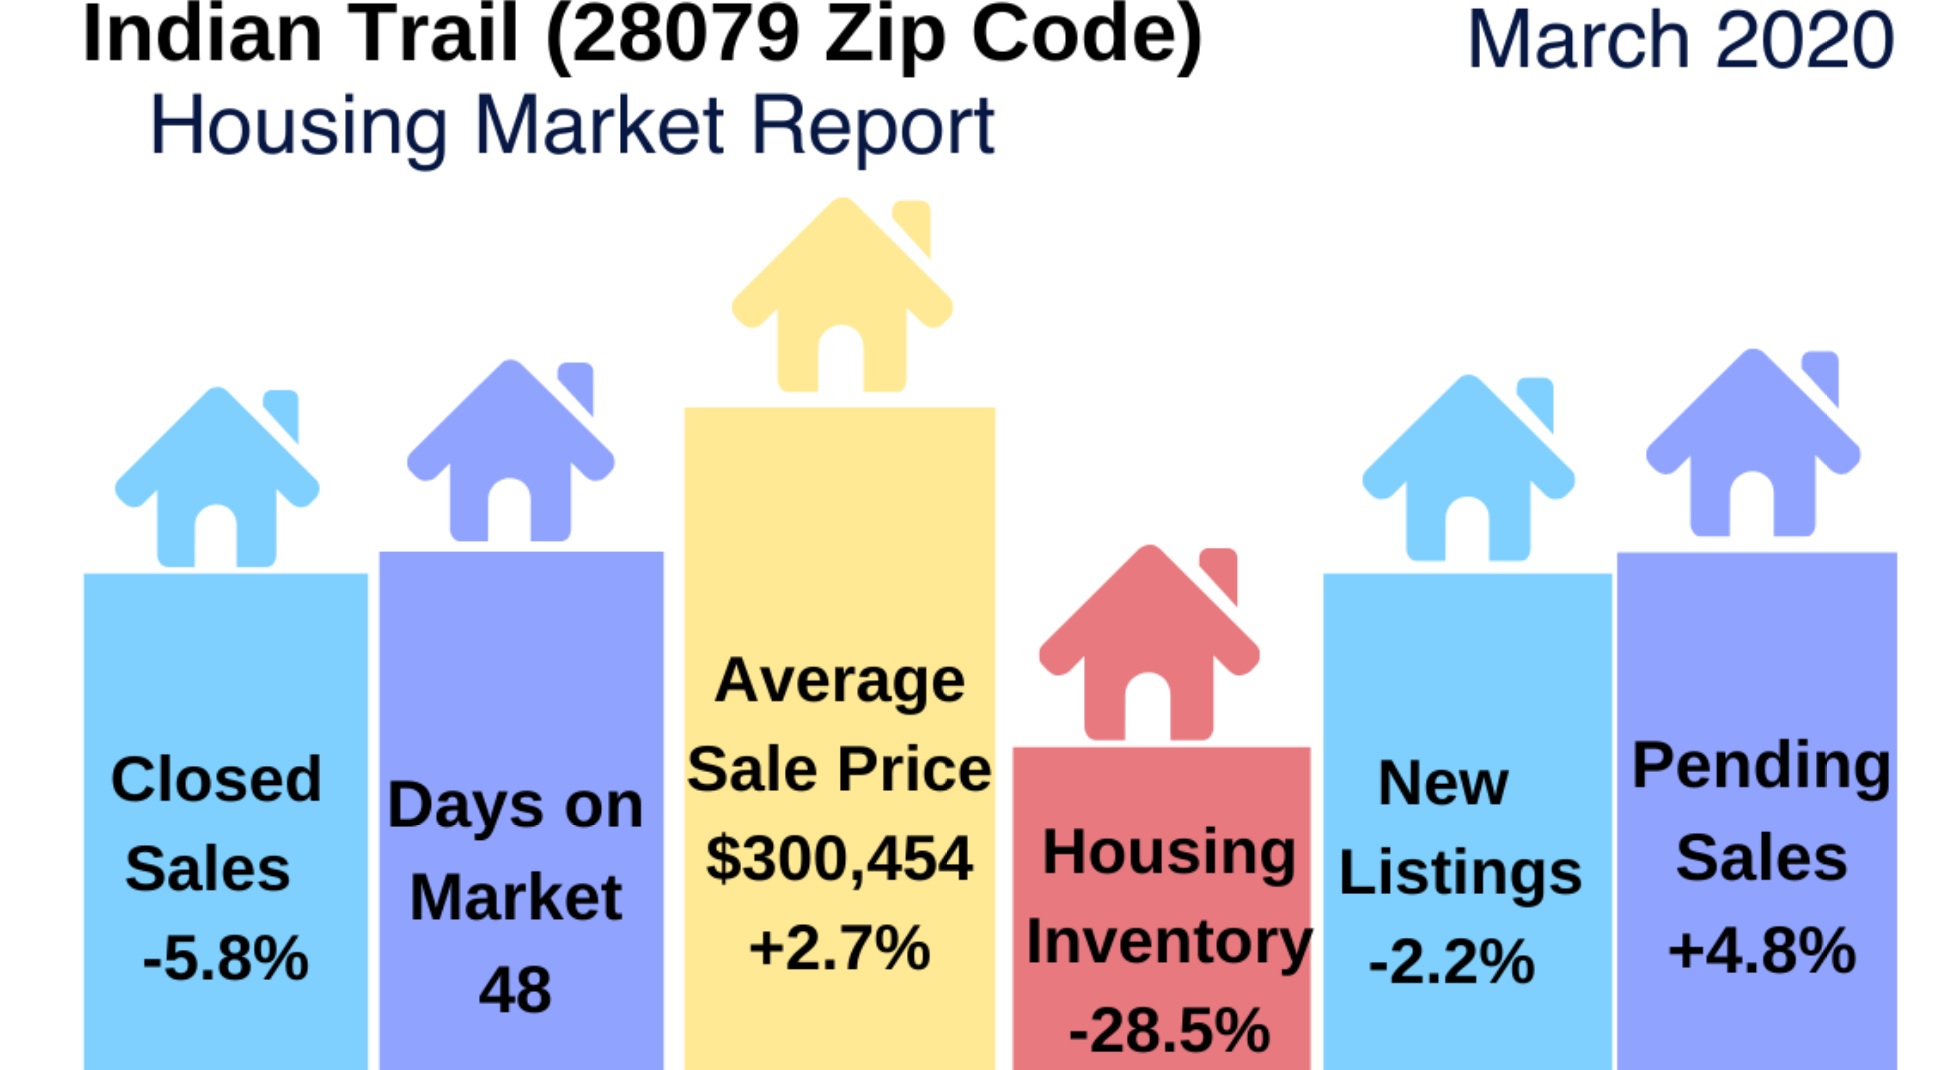 Indian Trail Real Estate Snapshot March 2020